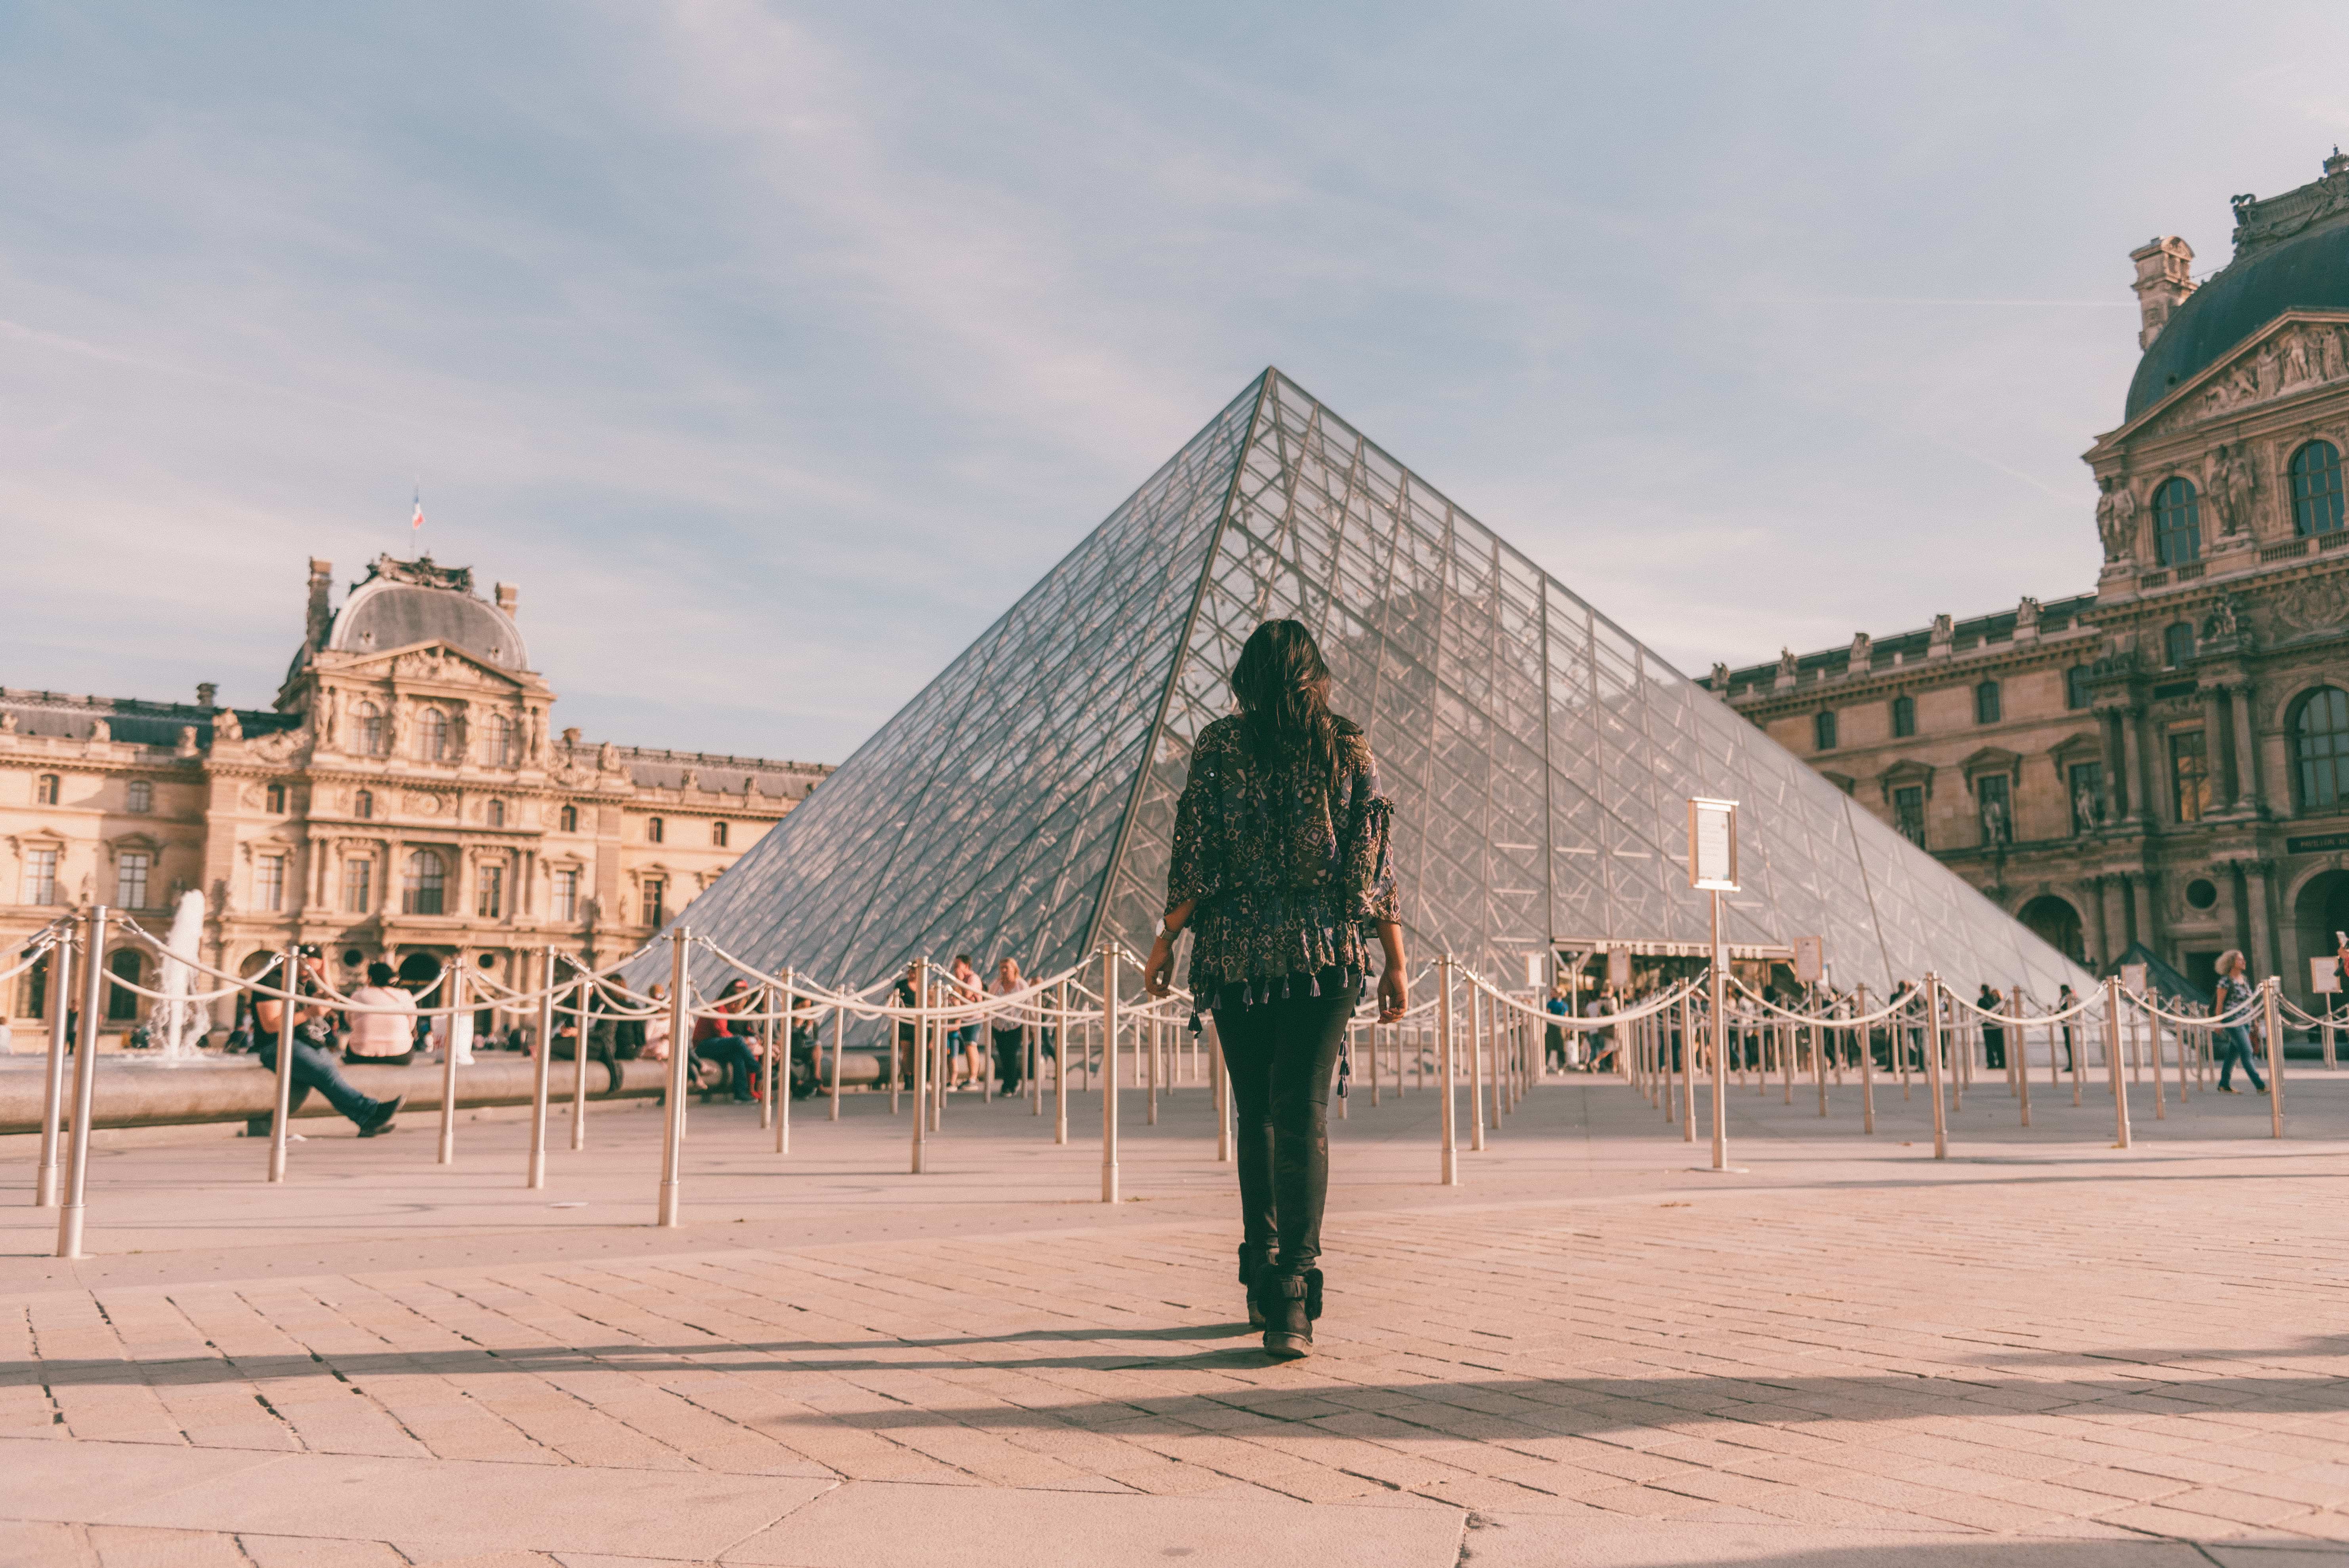 Most Instagrammable places in Paris, Louvre Museum